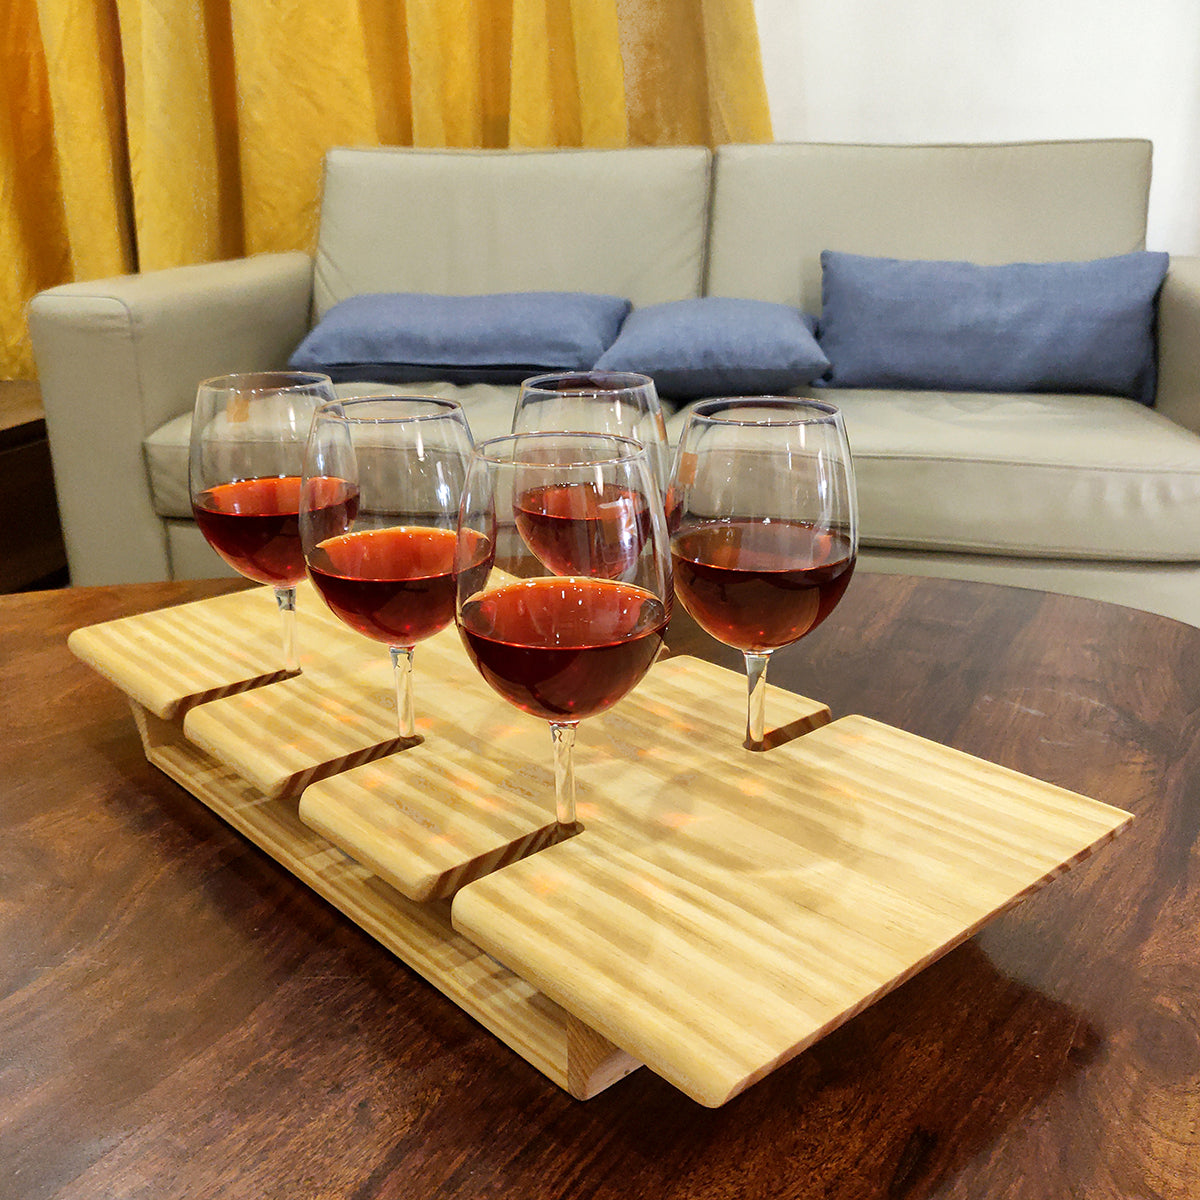 Wooden Wine Glass Tray, Size 20 X 9.5 X 2.25 inches